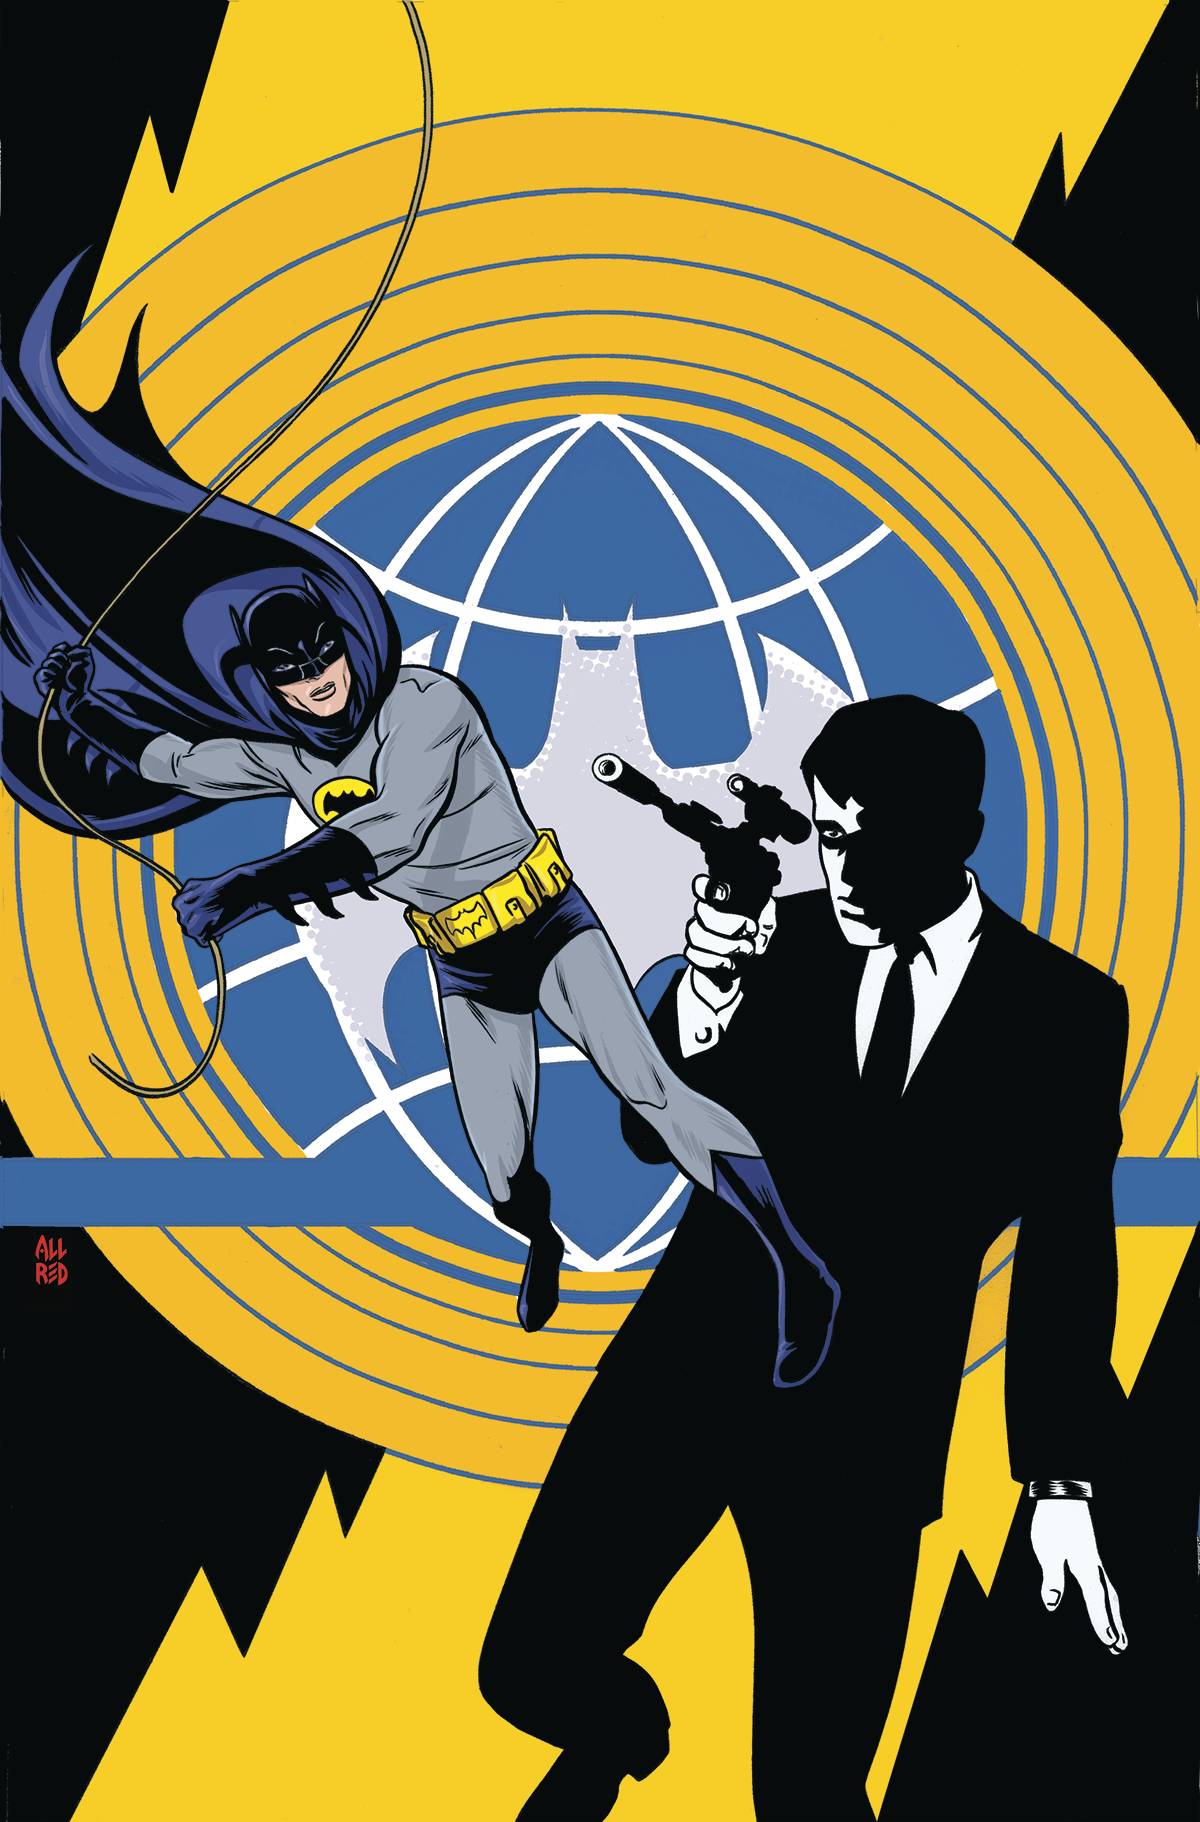 Batman 66 Meets the Man From Uncle Hardcover